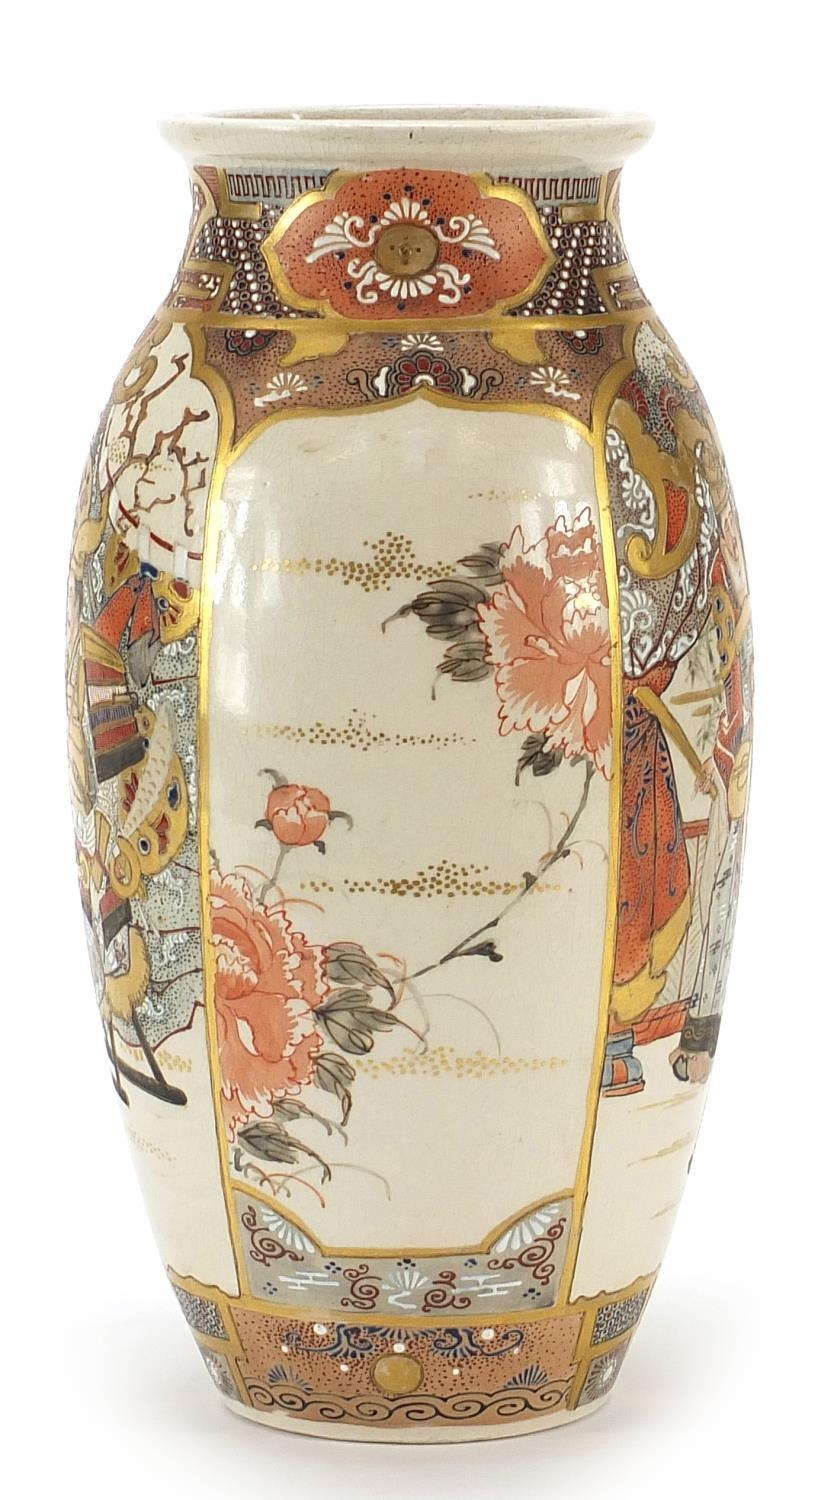 Japanese Satsuma pottery vase hand painted with figures and flowers, 29.5cm high - Image 6 of 9